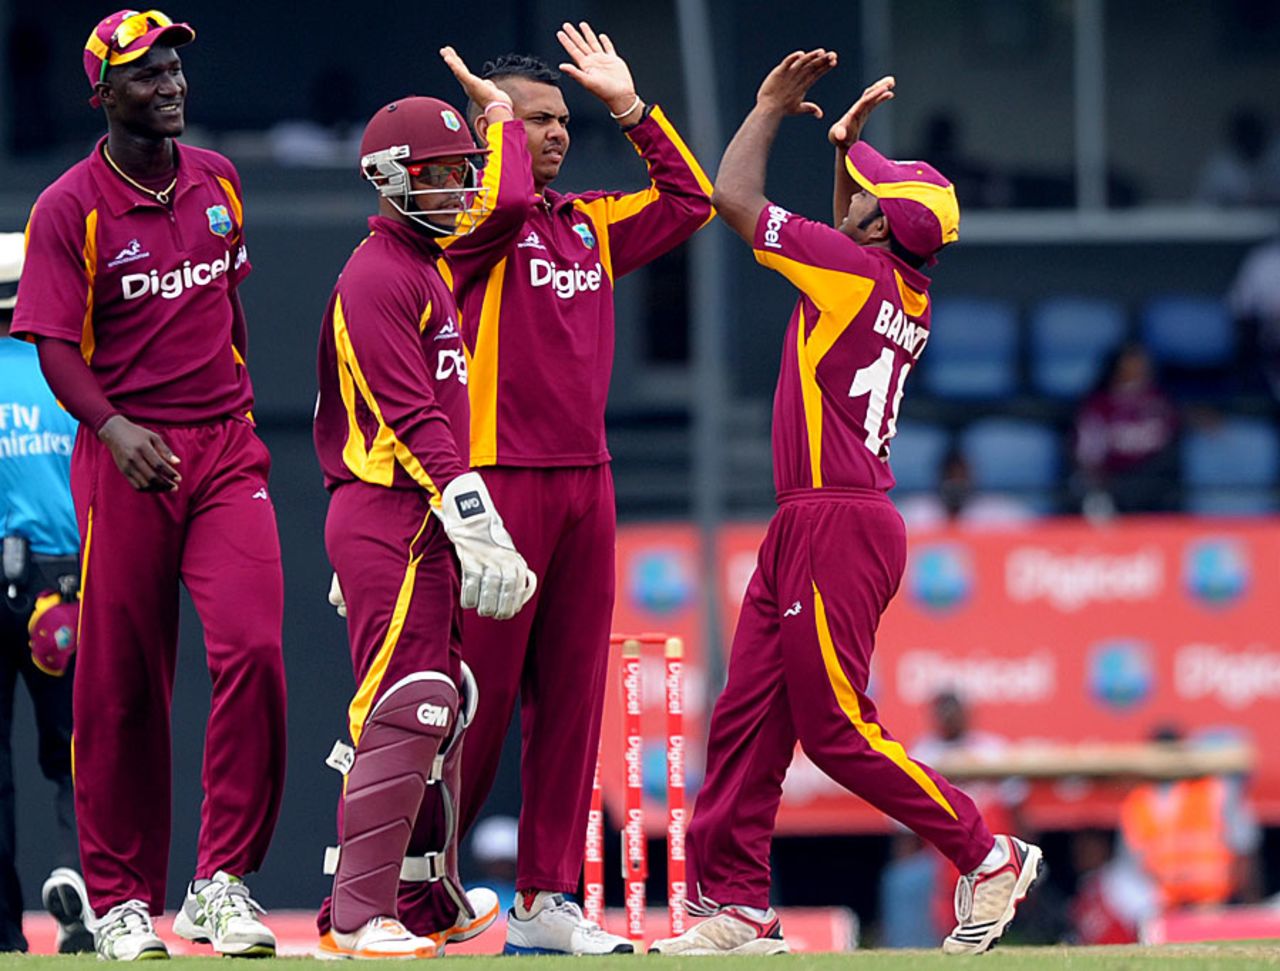 West Indies celebrate their first breakthrough, West Indies v Australia, 5th ODI, Gros Islet, March 25, 2012